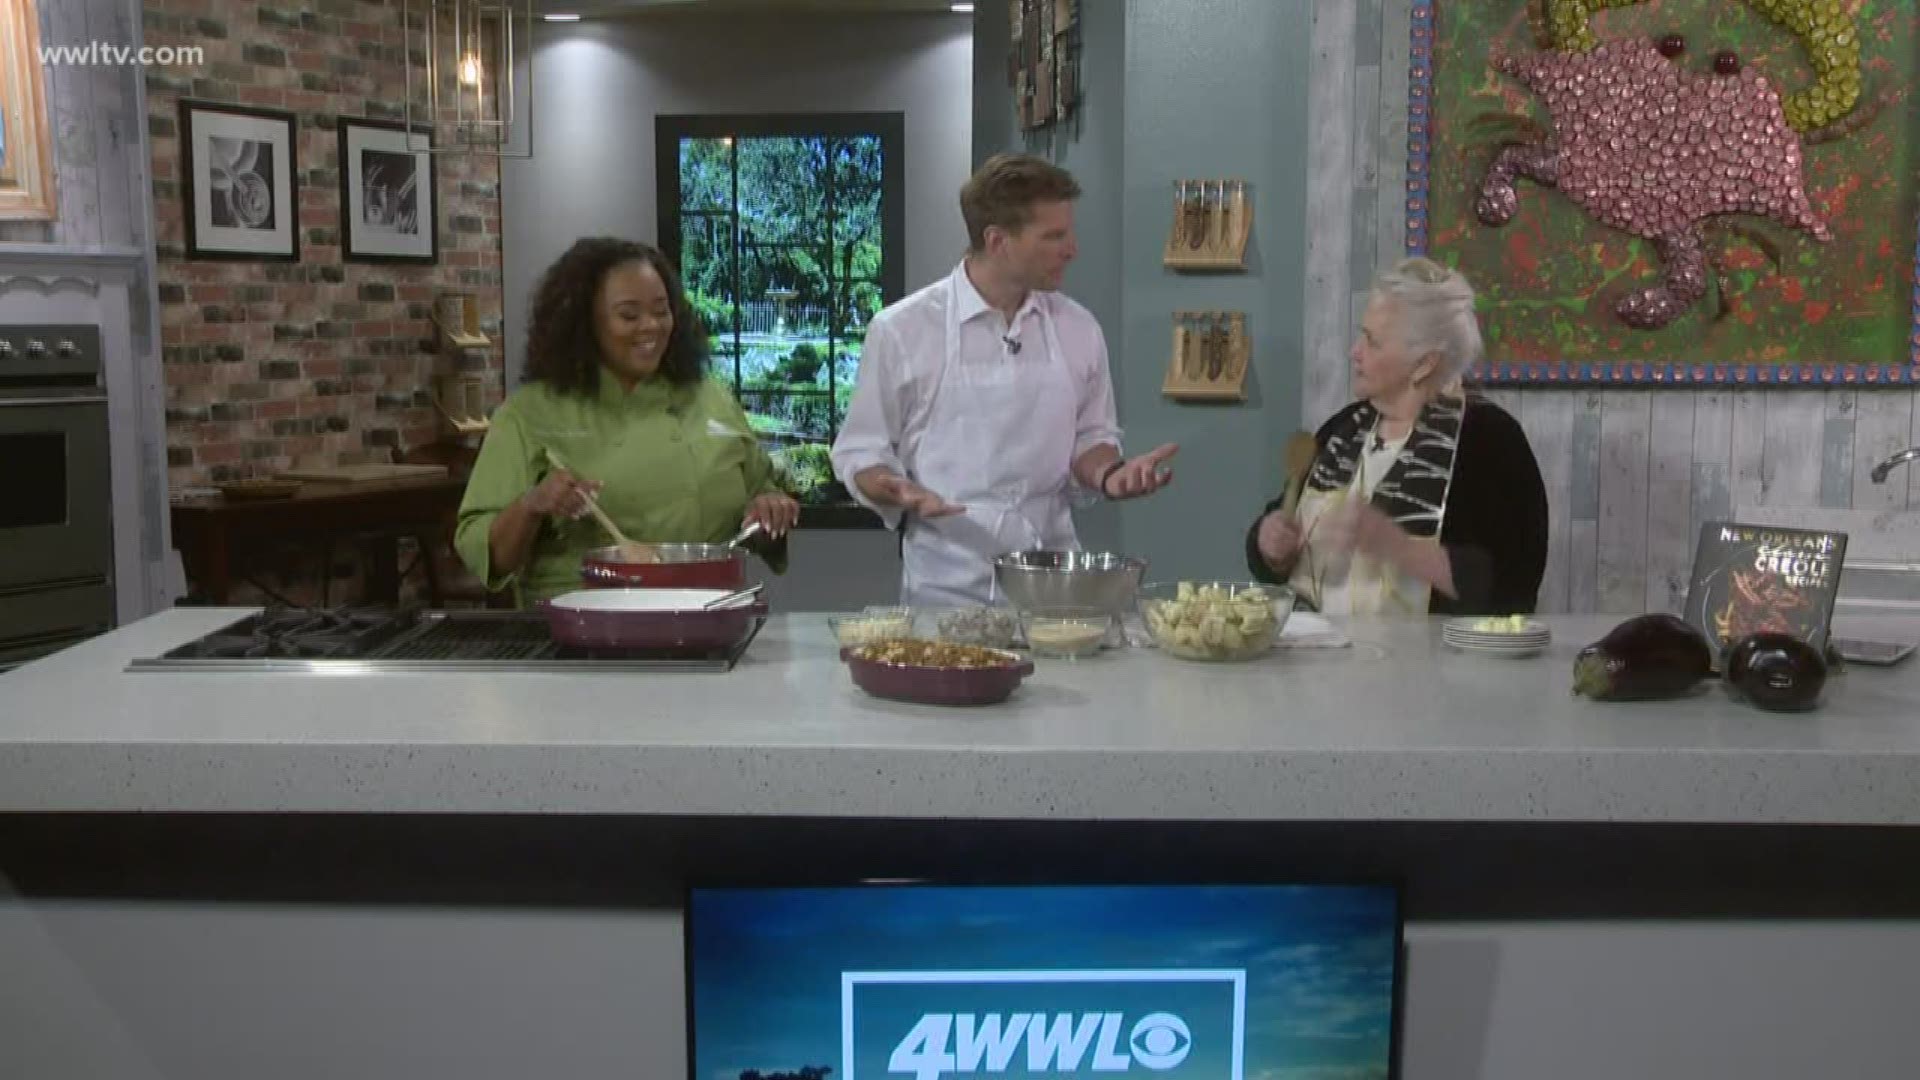 Celebrate Thanksgiving by honoring Leah Chase with her recipe for Crabmeat & Shrimp Farci with Kit Wohl & Dee LaVigne from SOFAB.